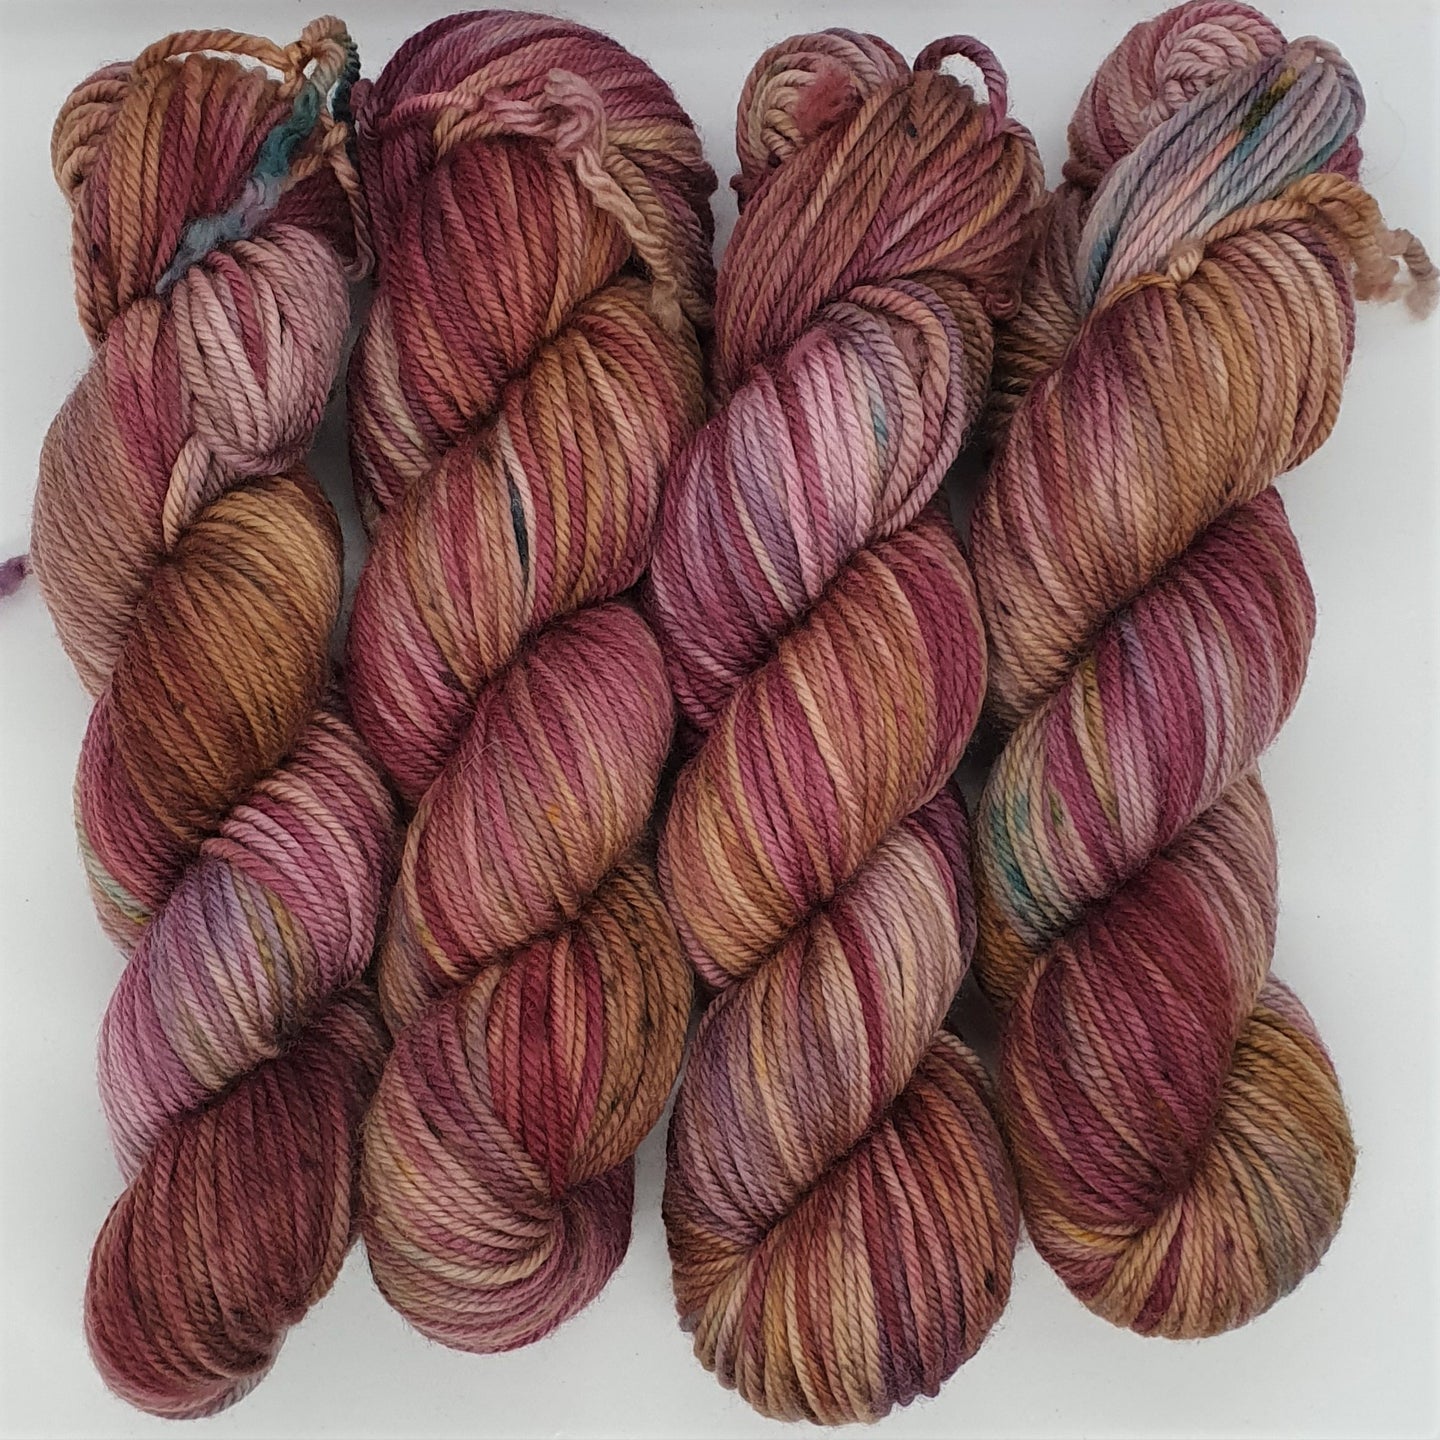 Rose Finch (Wyvern Worsted 12ply)